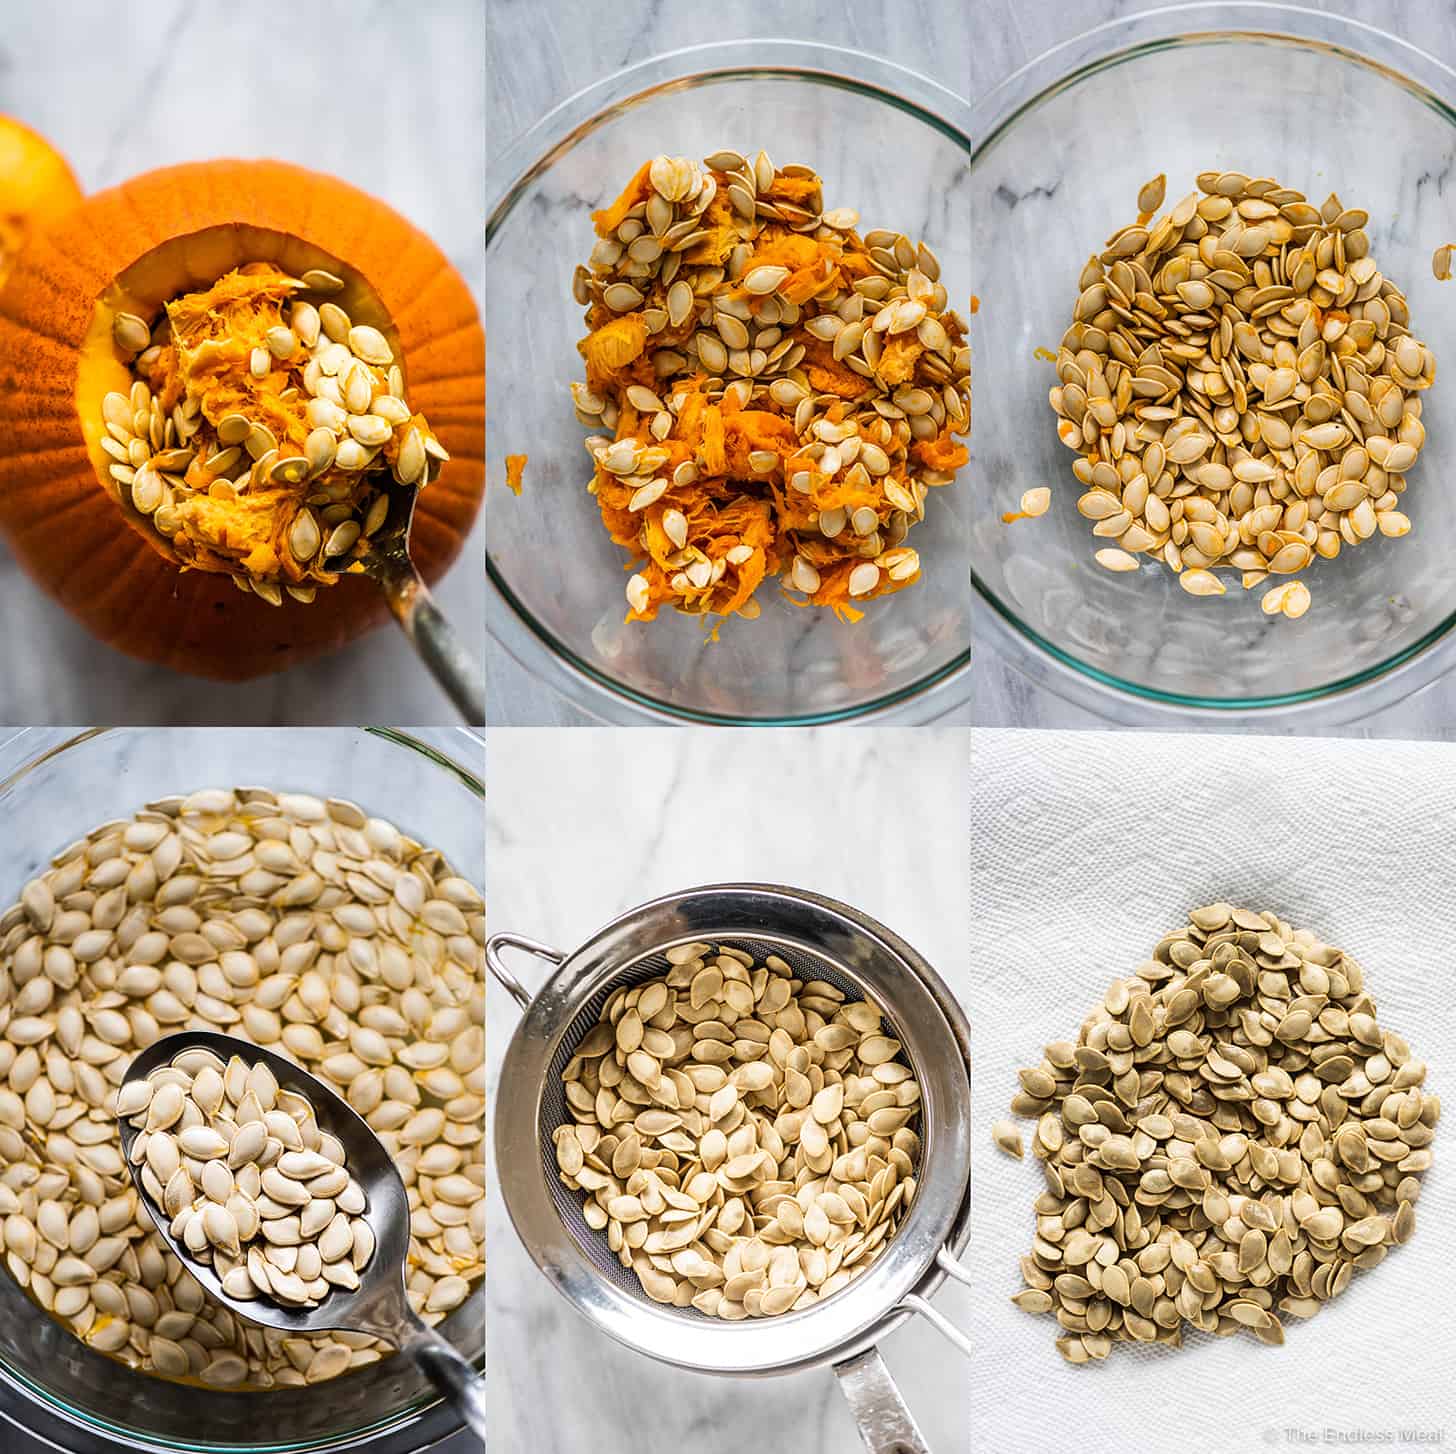 6 pictures showing how to roast pumpkin seeds.